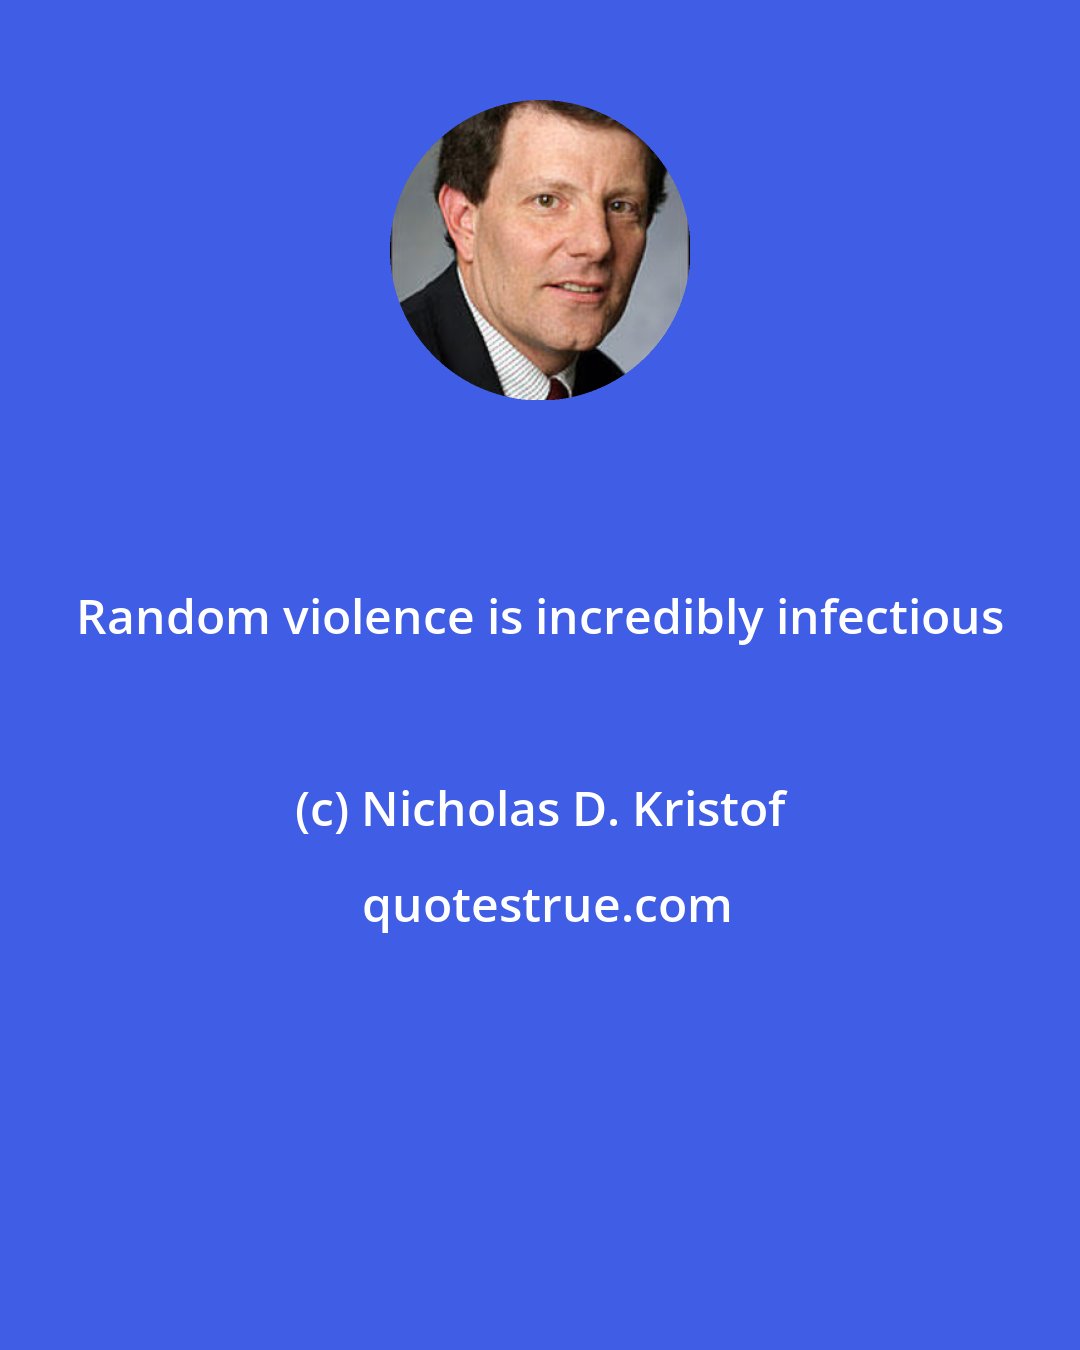 Nicholas D. Kristof: Random violence is incredibly infectious